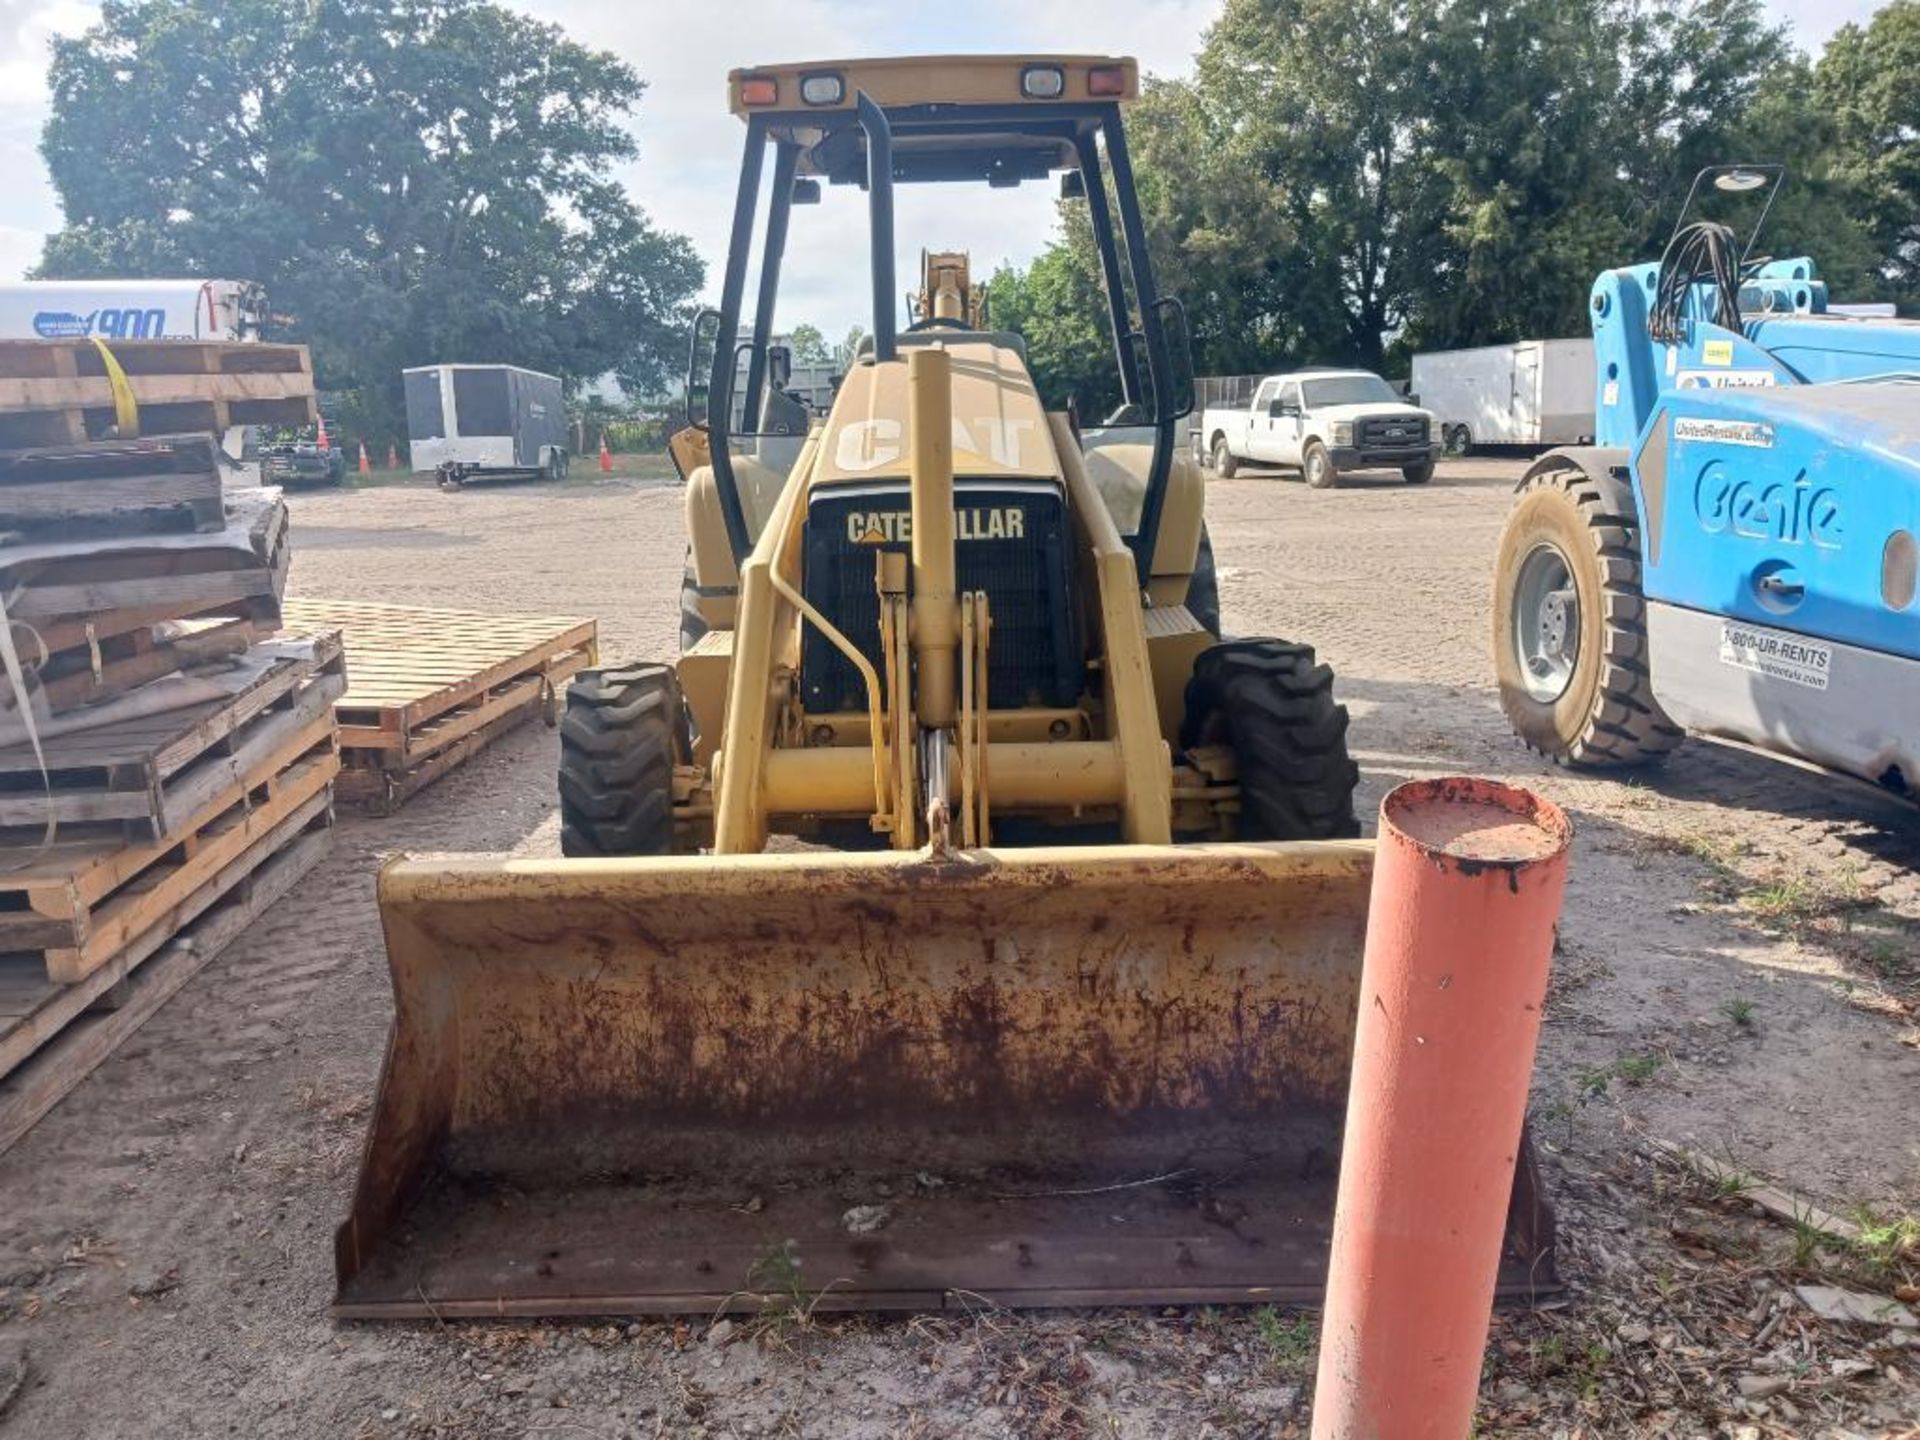 2000 Caterpillar 416C Backhoe, Turbo 4 X 4, Extendahoe, S/N 42N210581, 3,029 Hours (Located at 5910